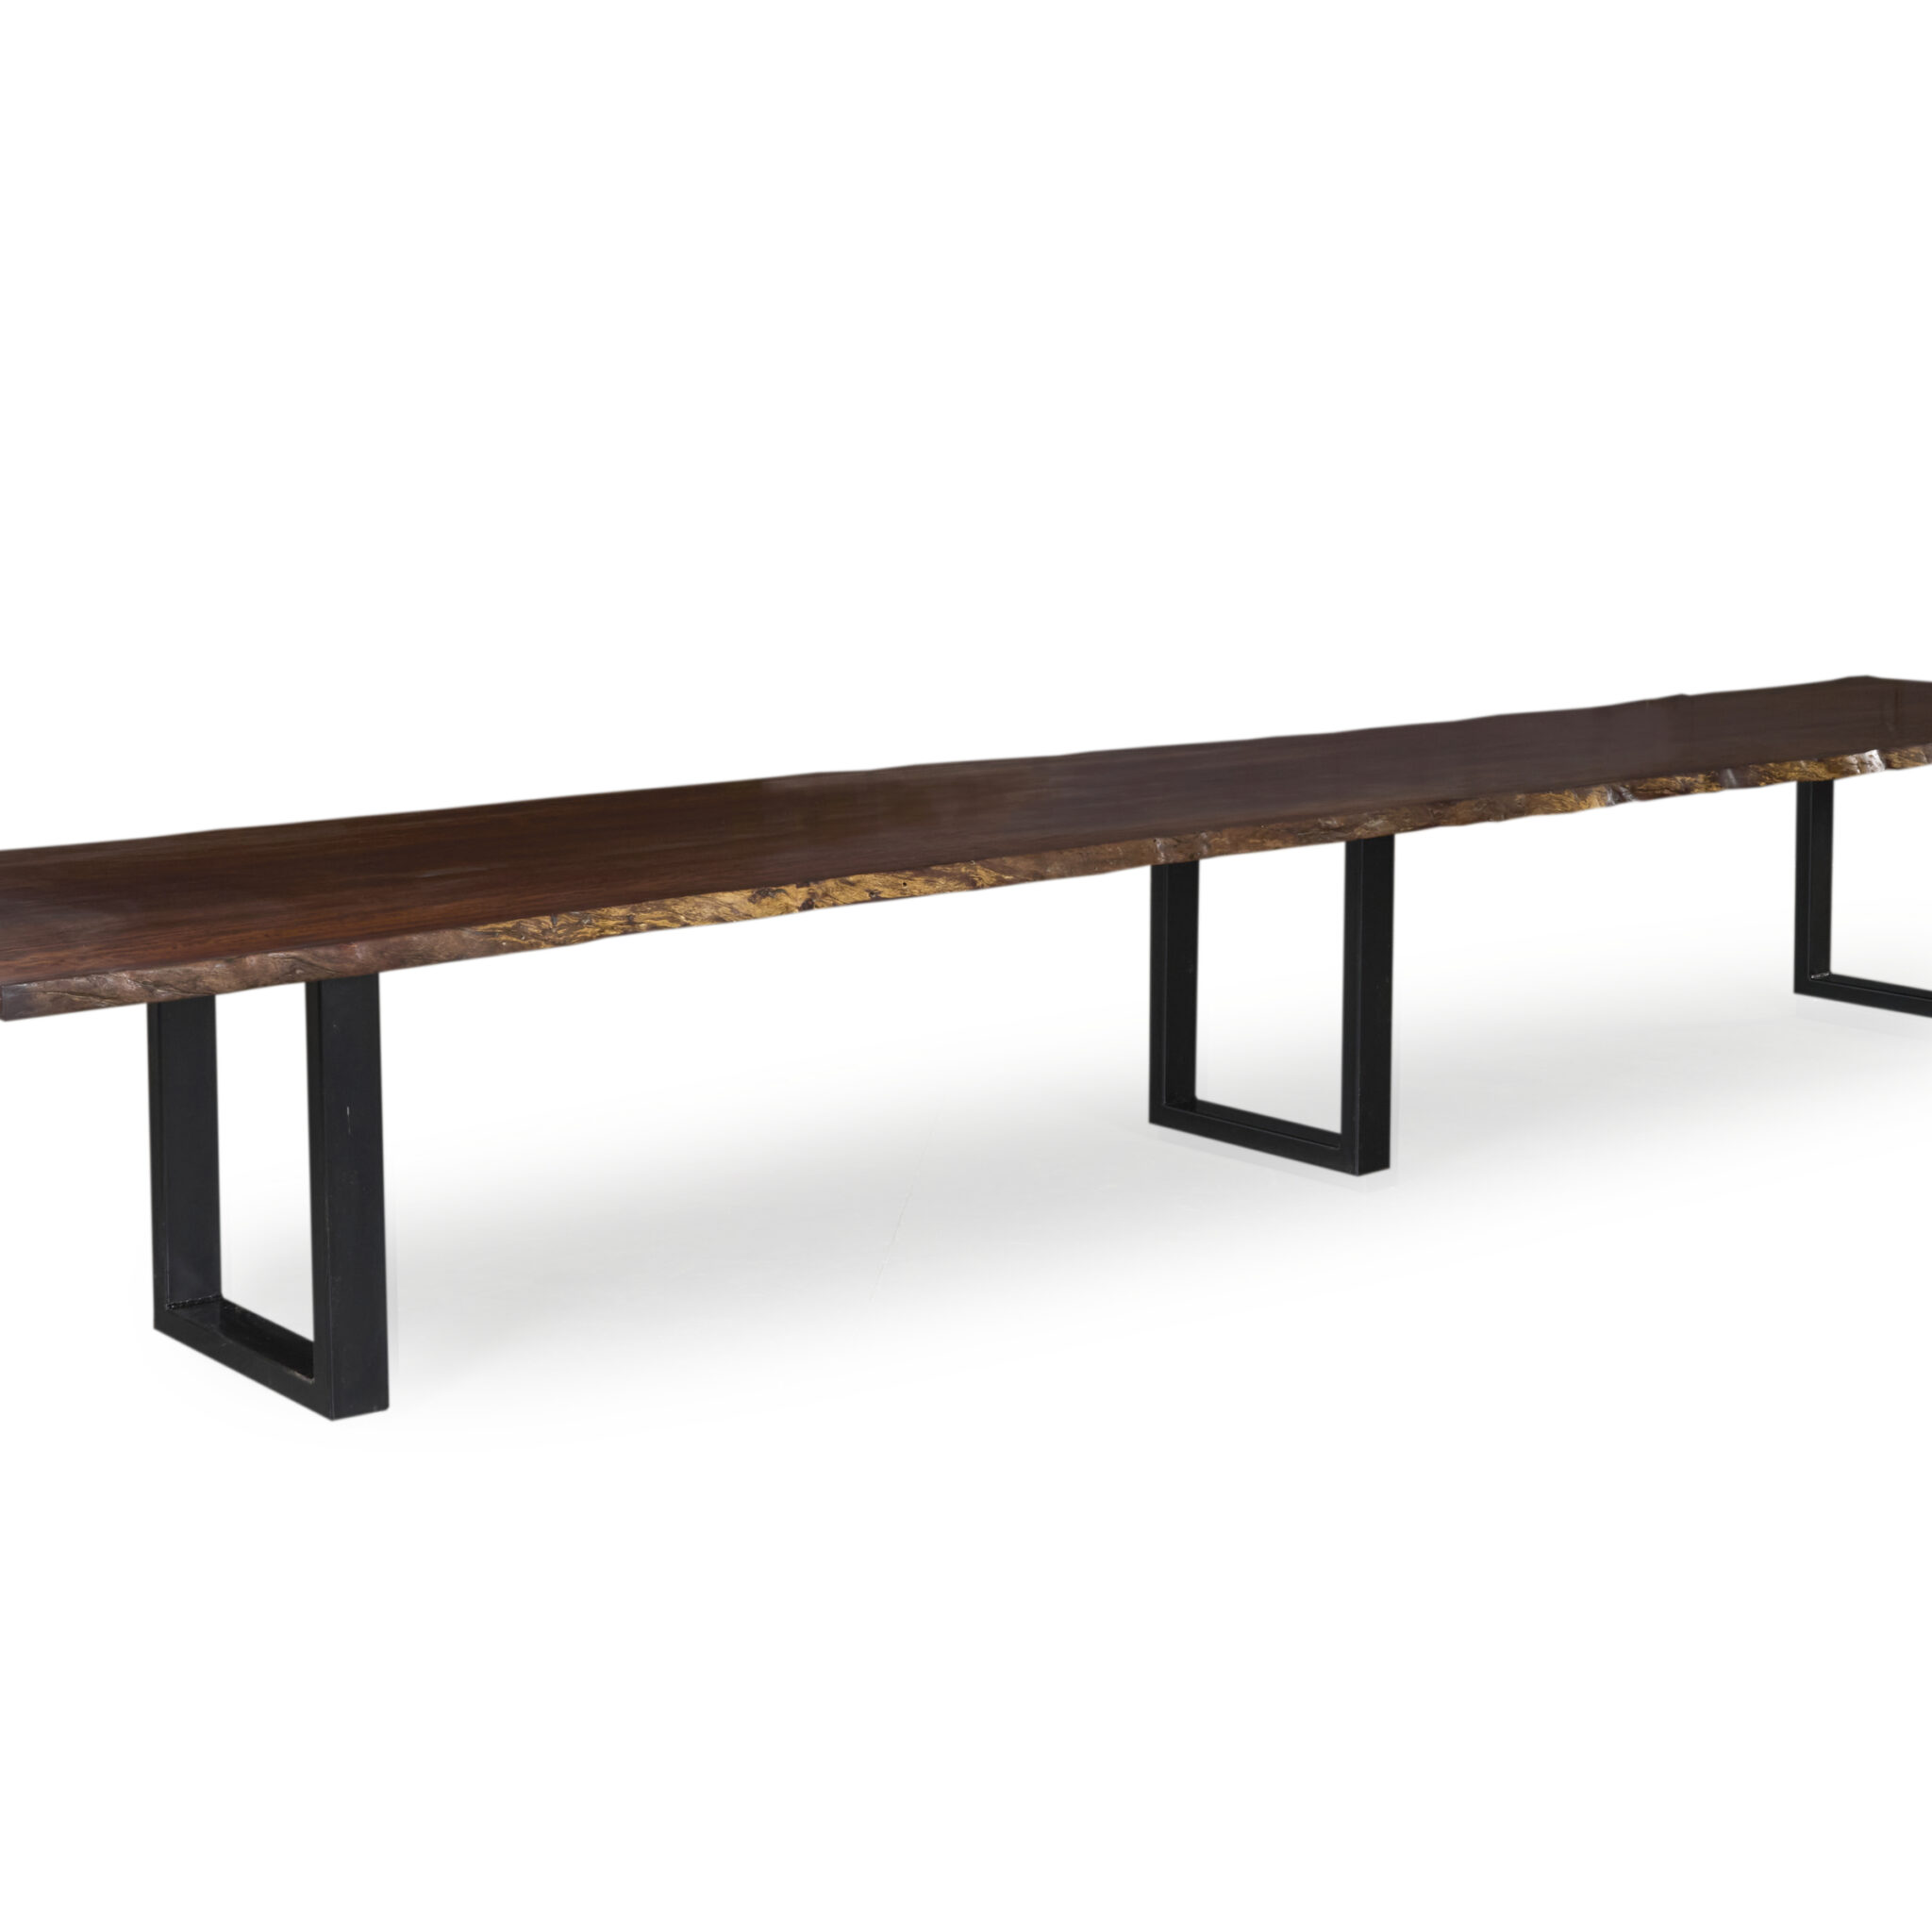 Versatile Brighton Table: Perfect for Dining or Boardroom Meetings